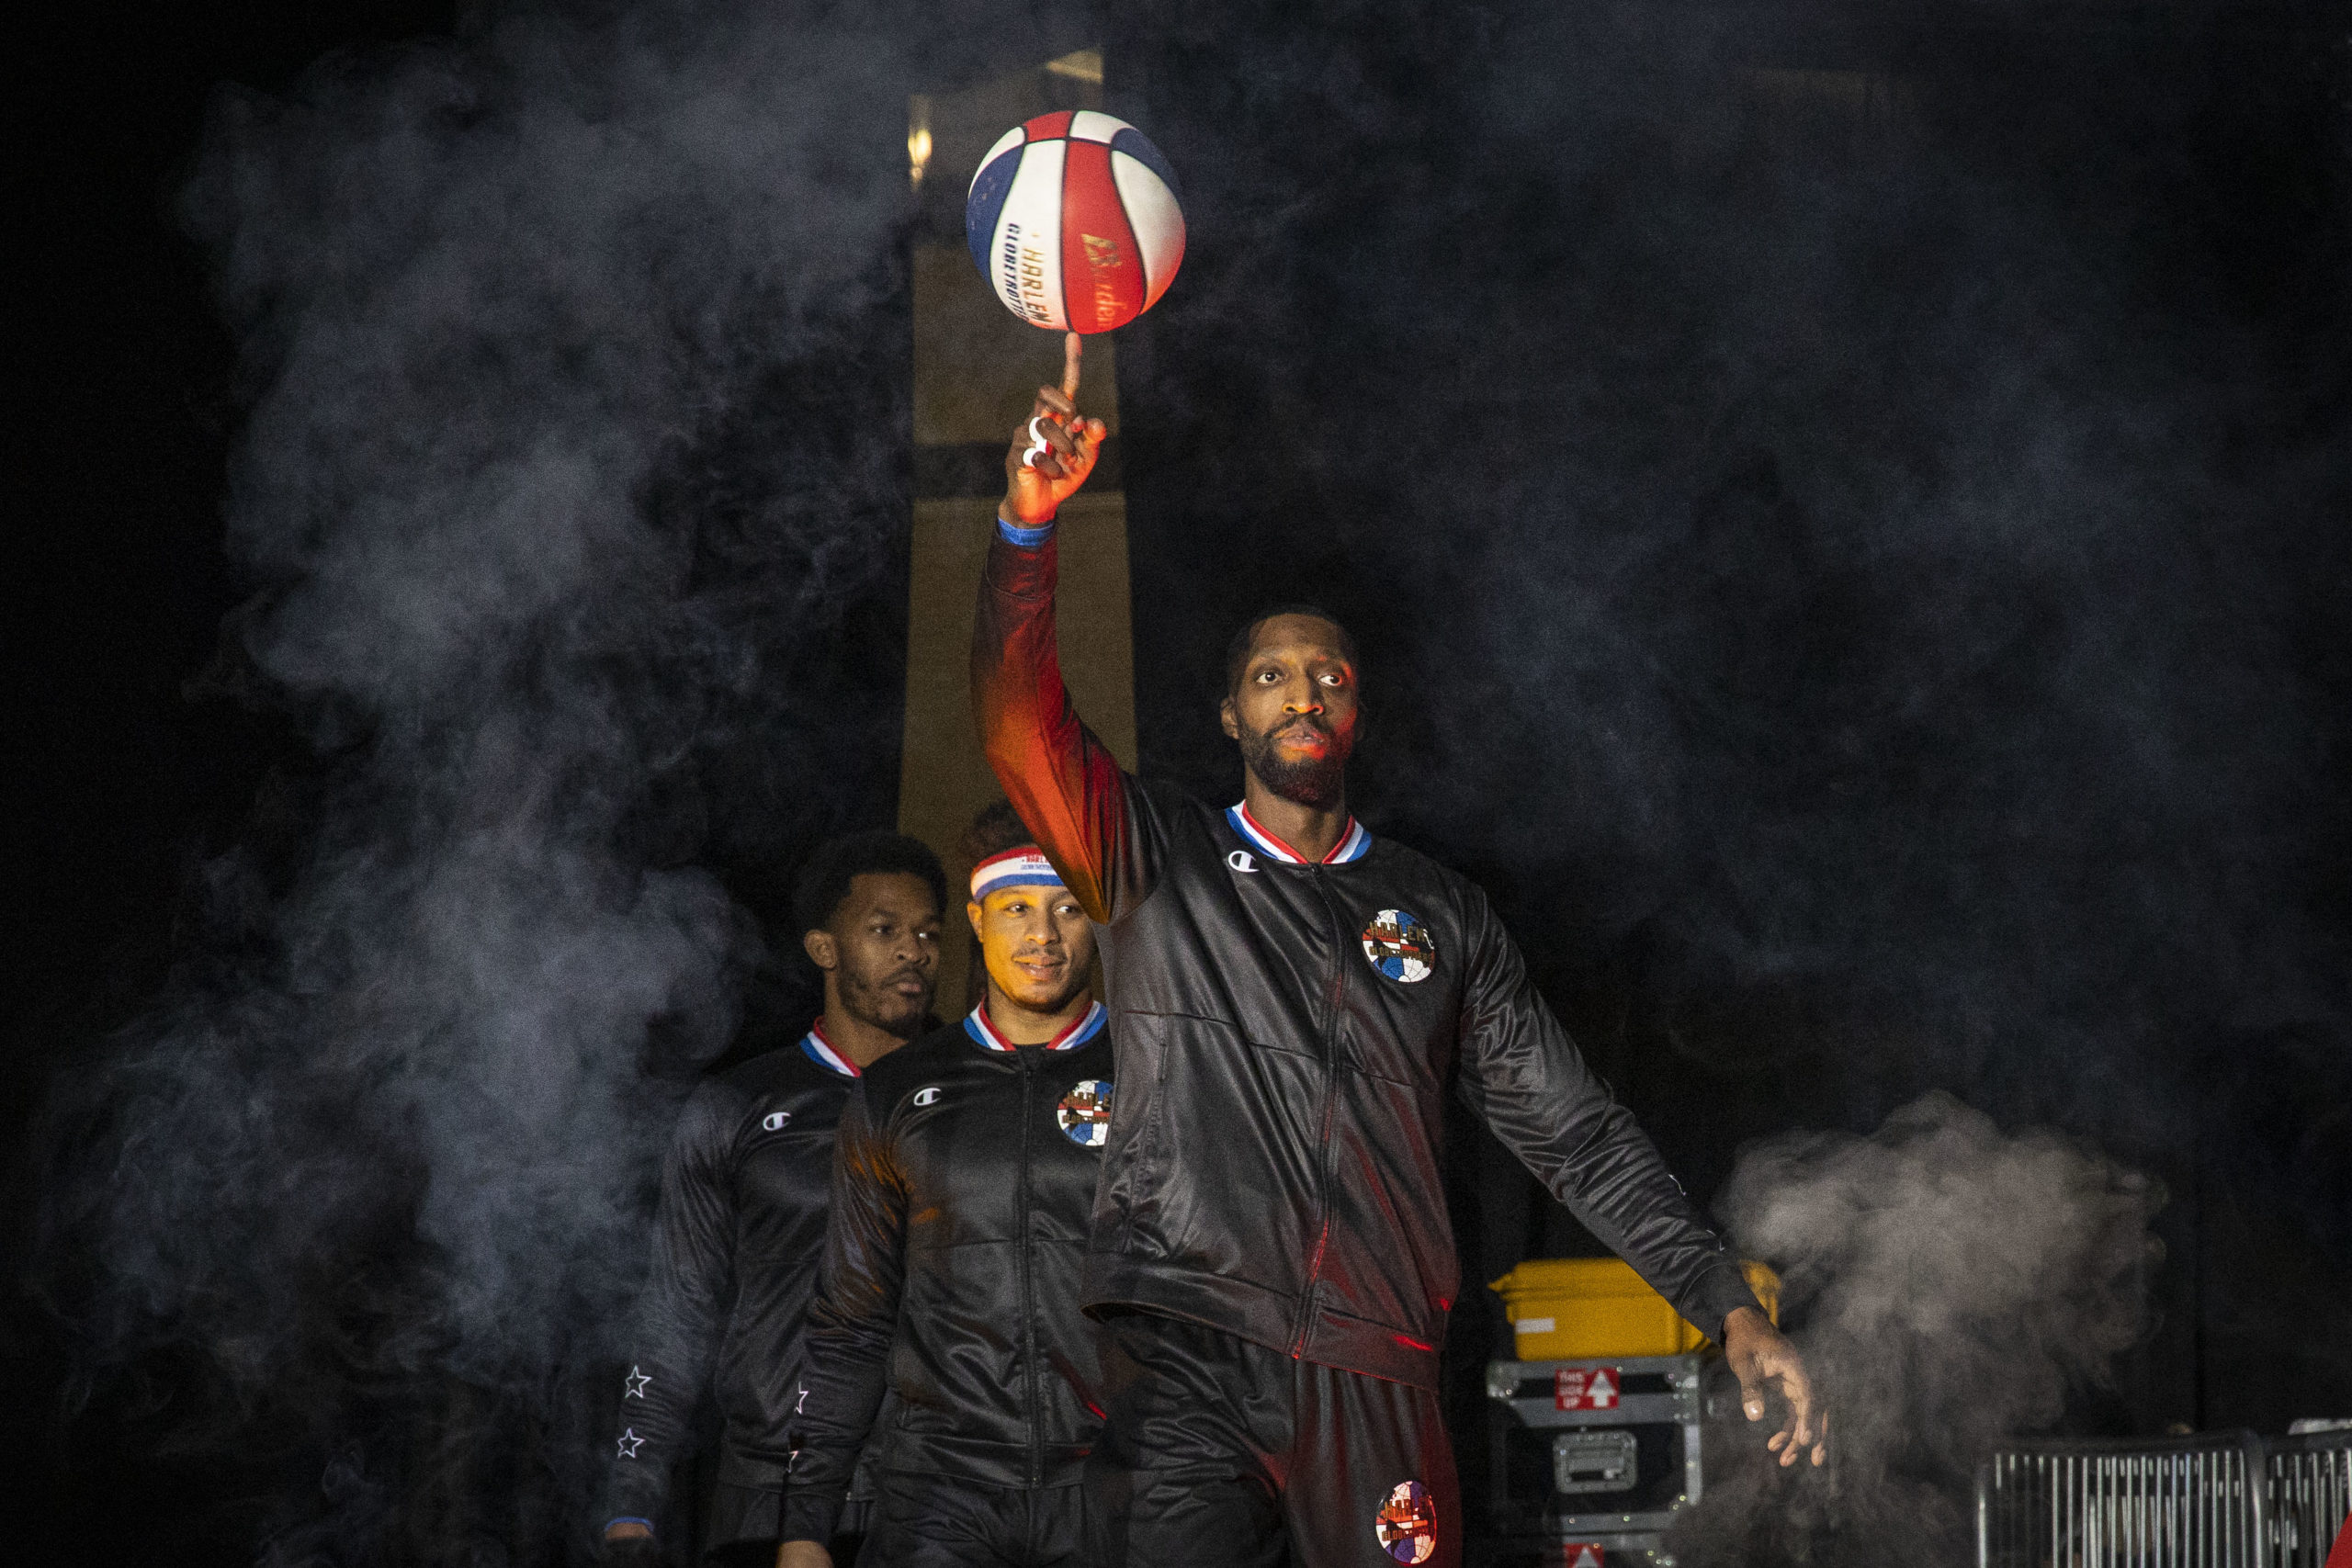 Harlem Globetrotters' 2010 World Tour brings high-flying fun to